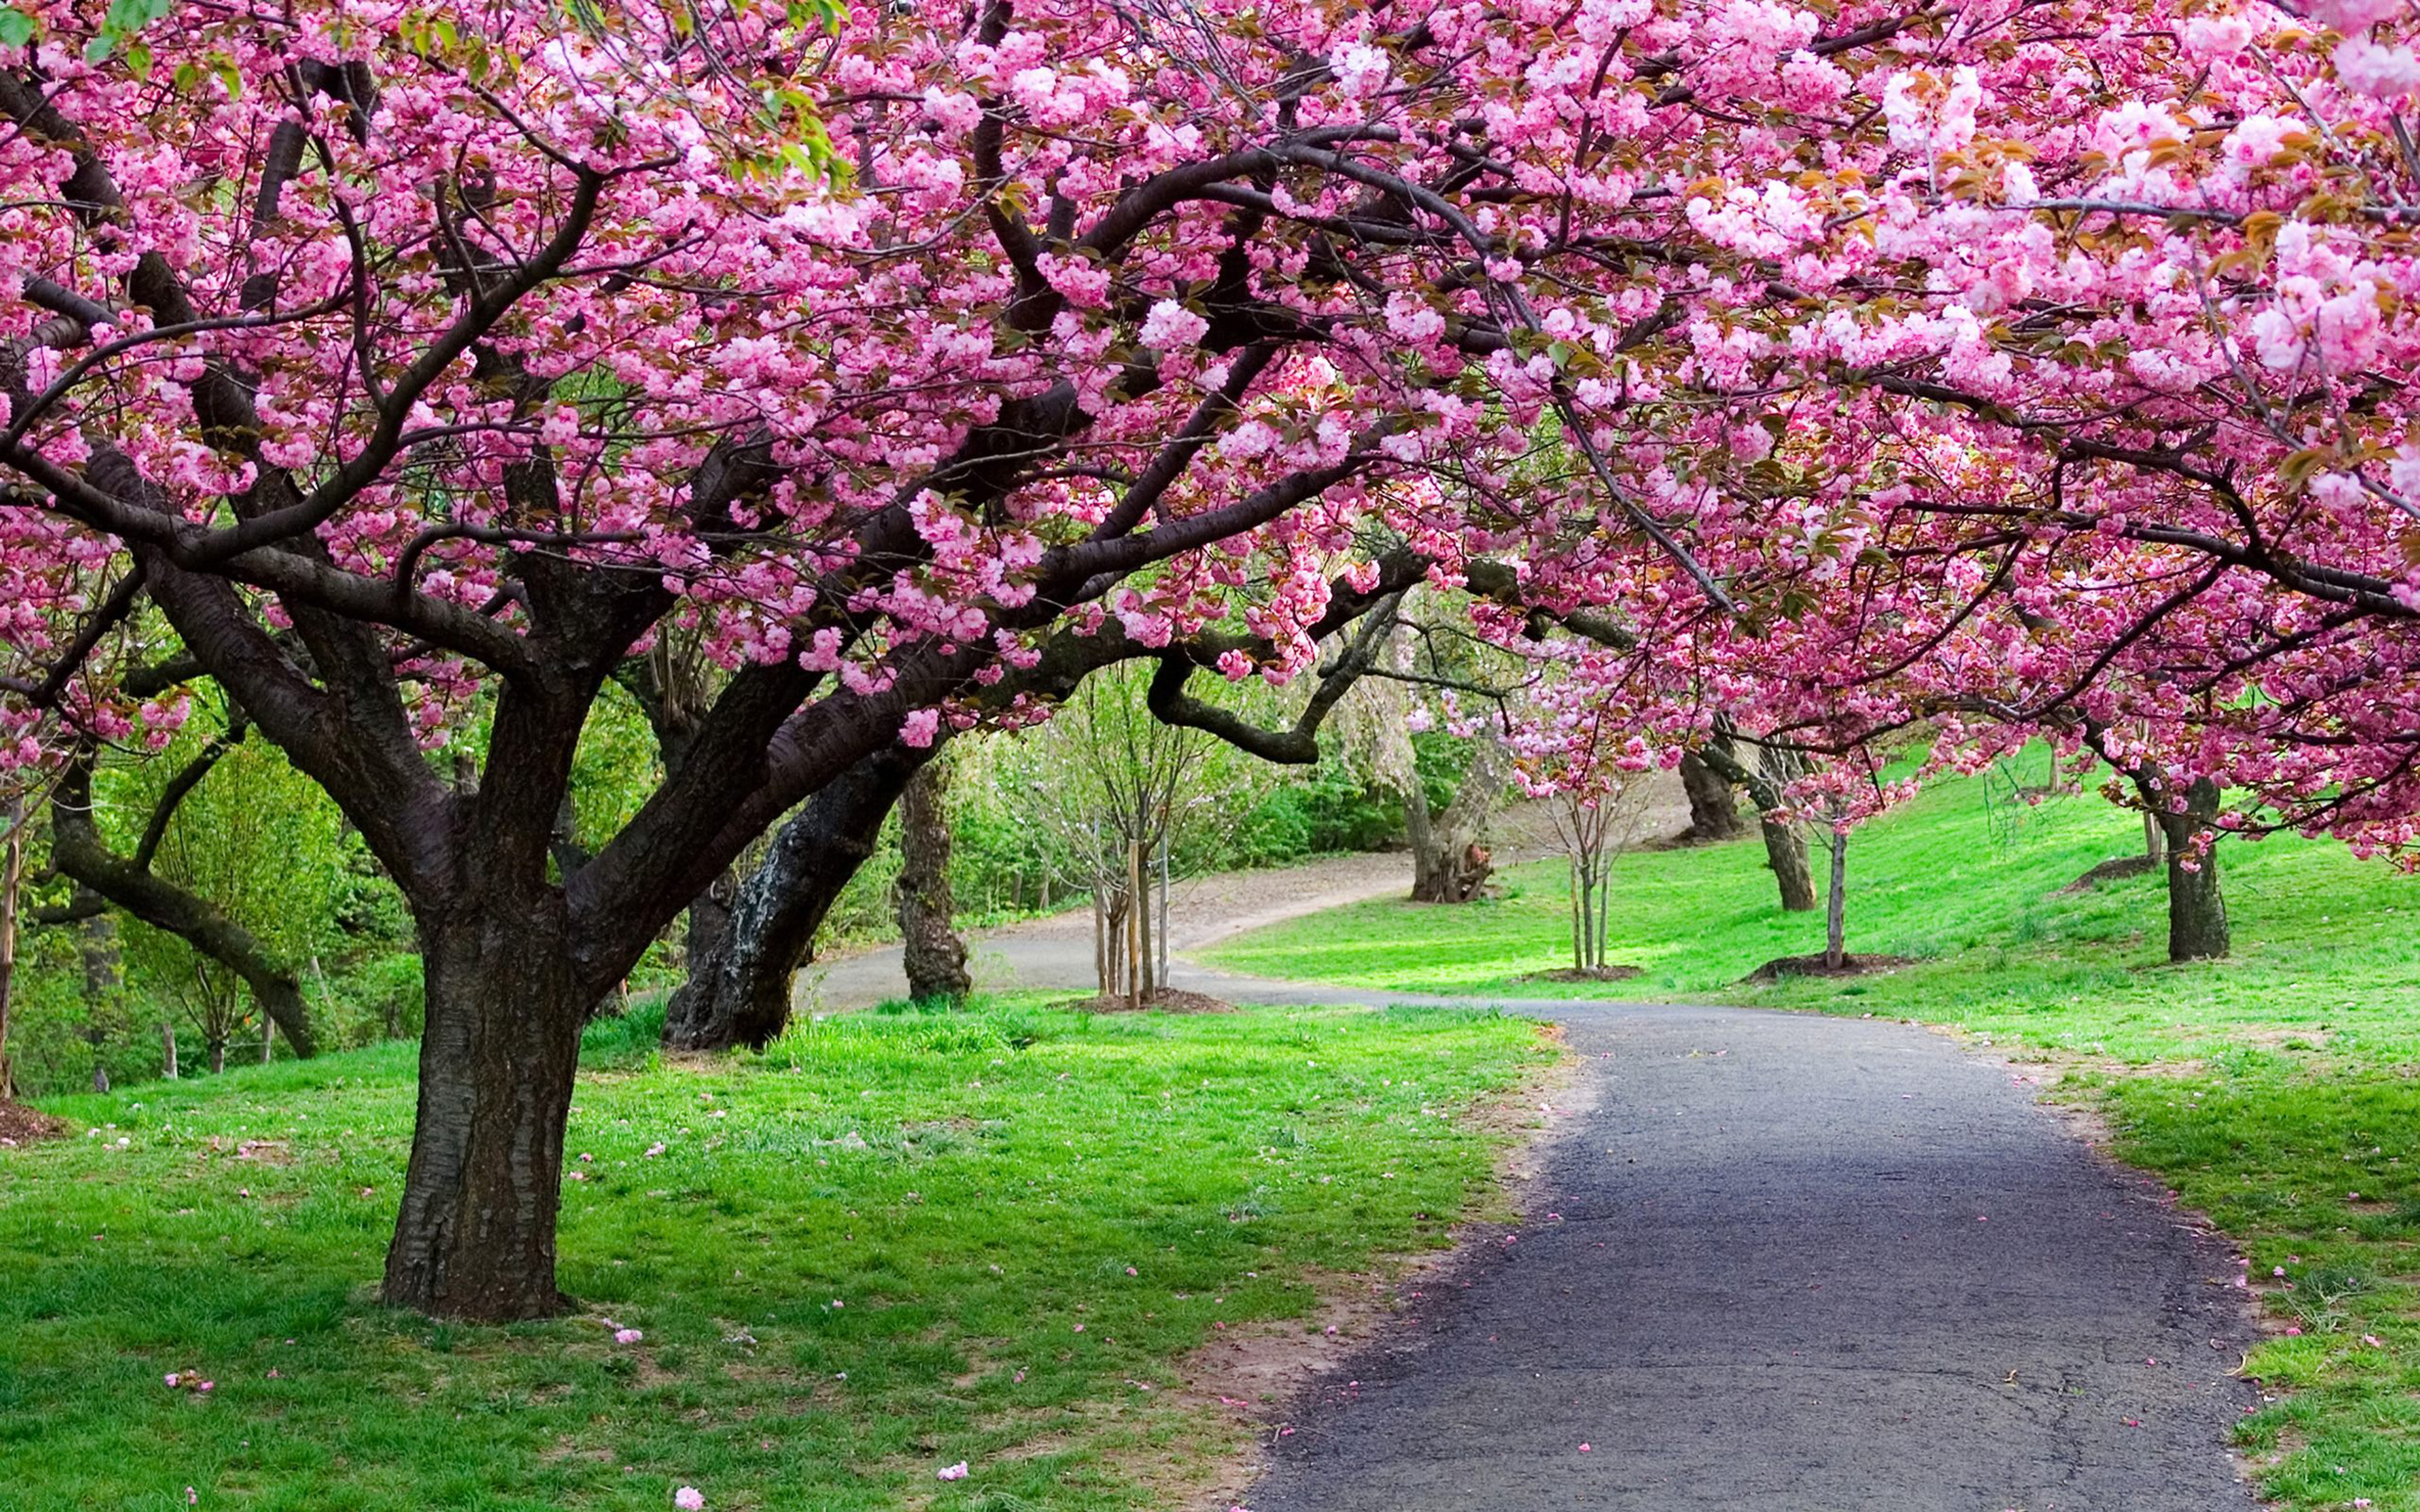 Ppark Green Grass, Blooming Trees, Pink Flowers From Blossoms